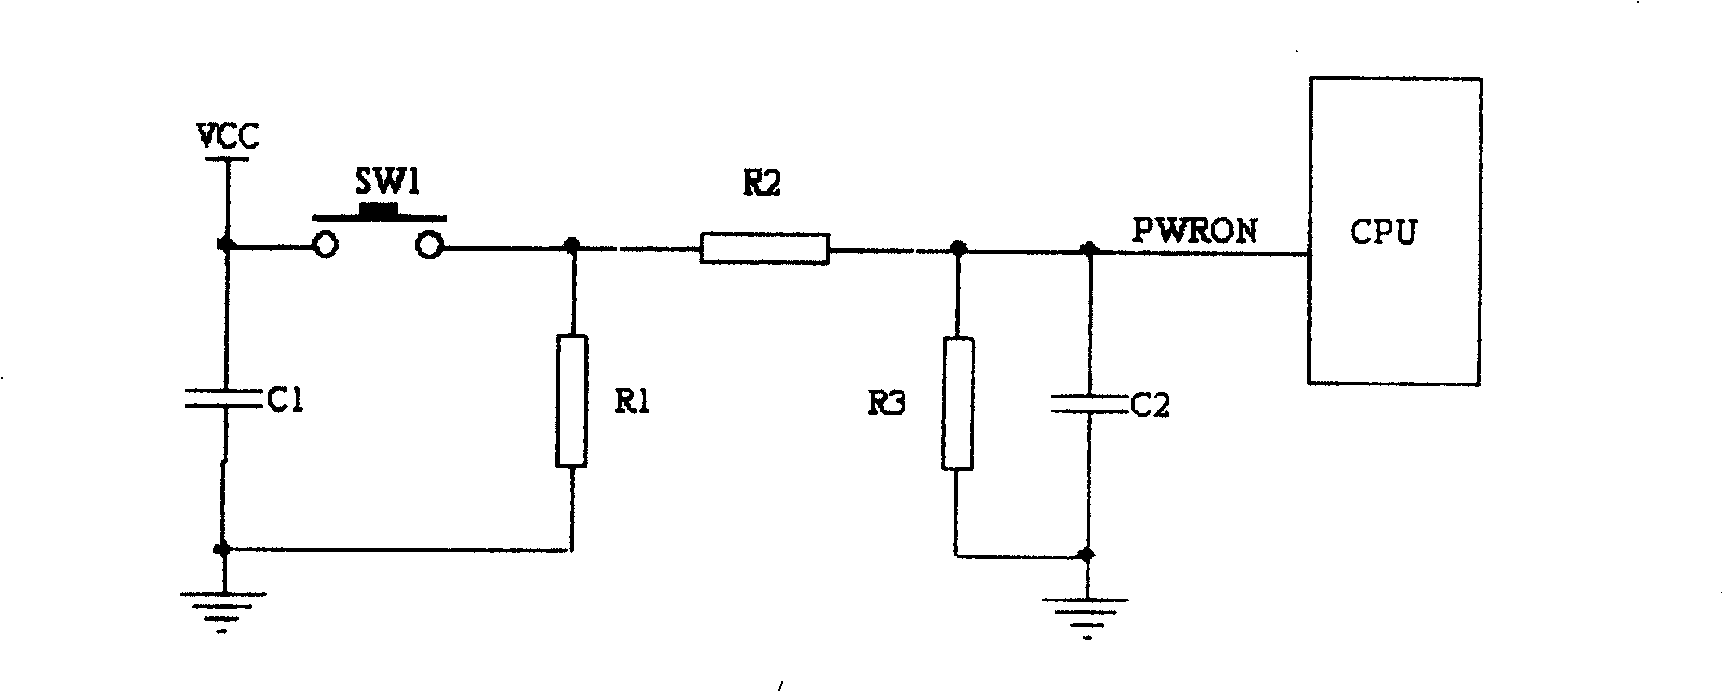 Control method and its device for preventing error cut-off machine